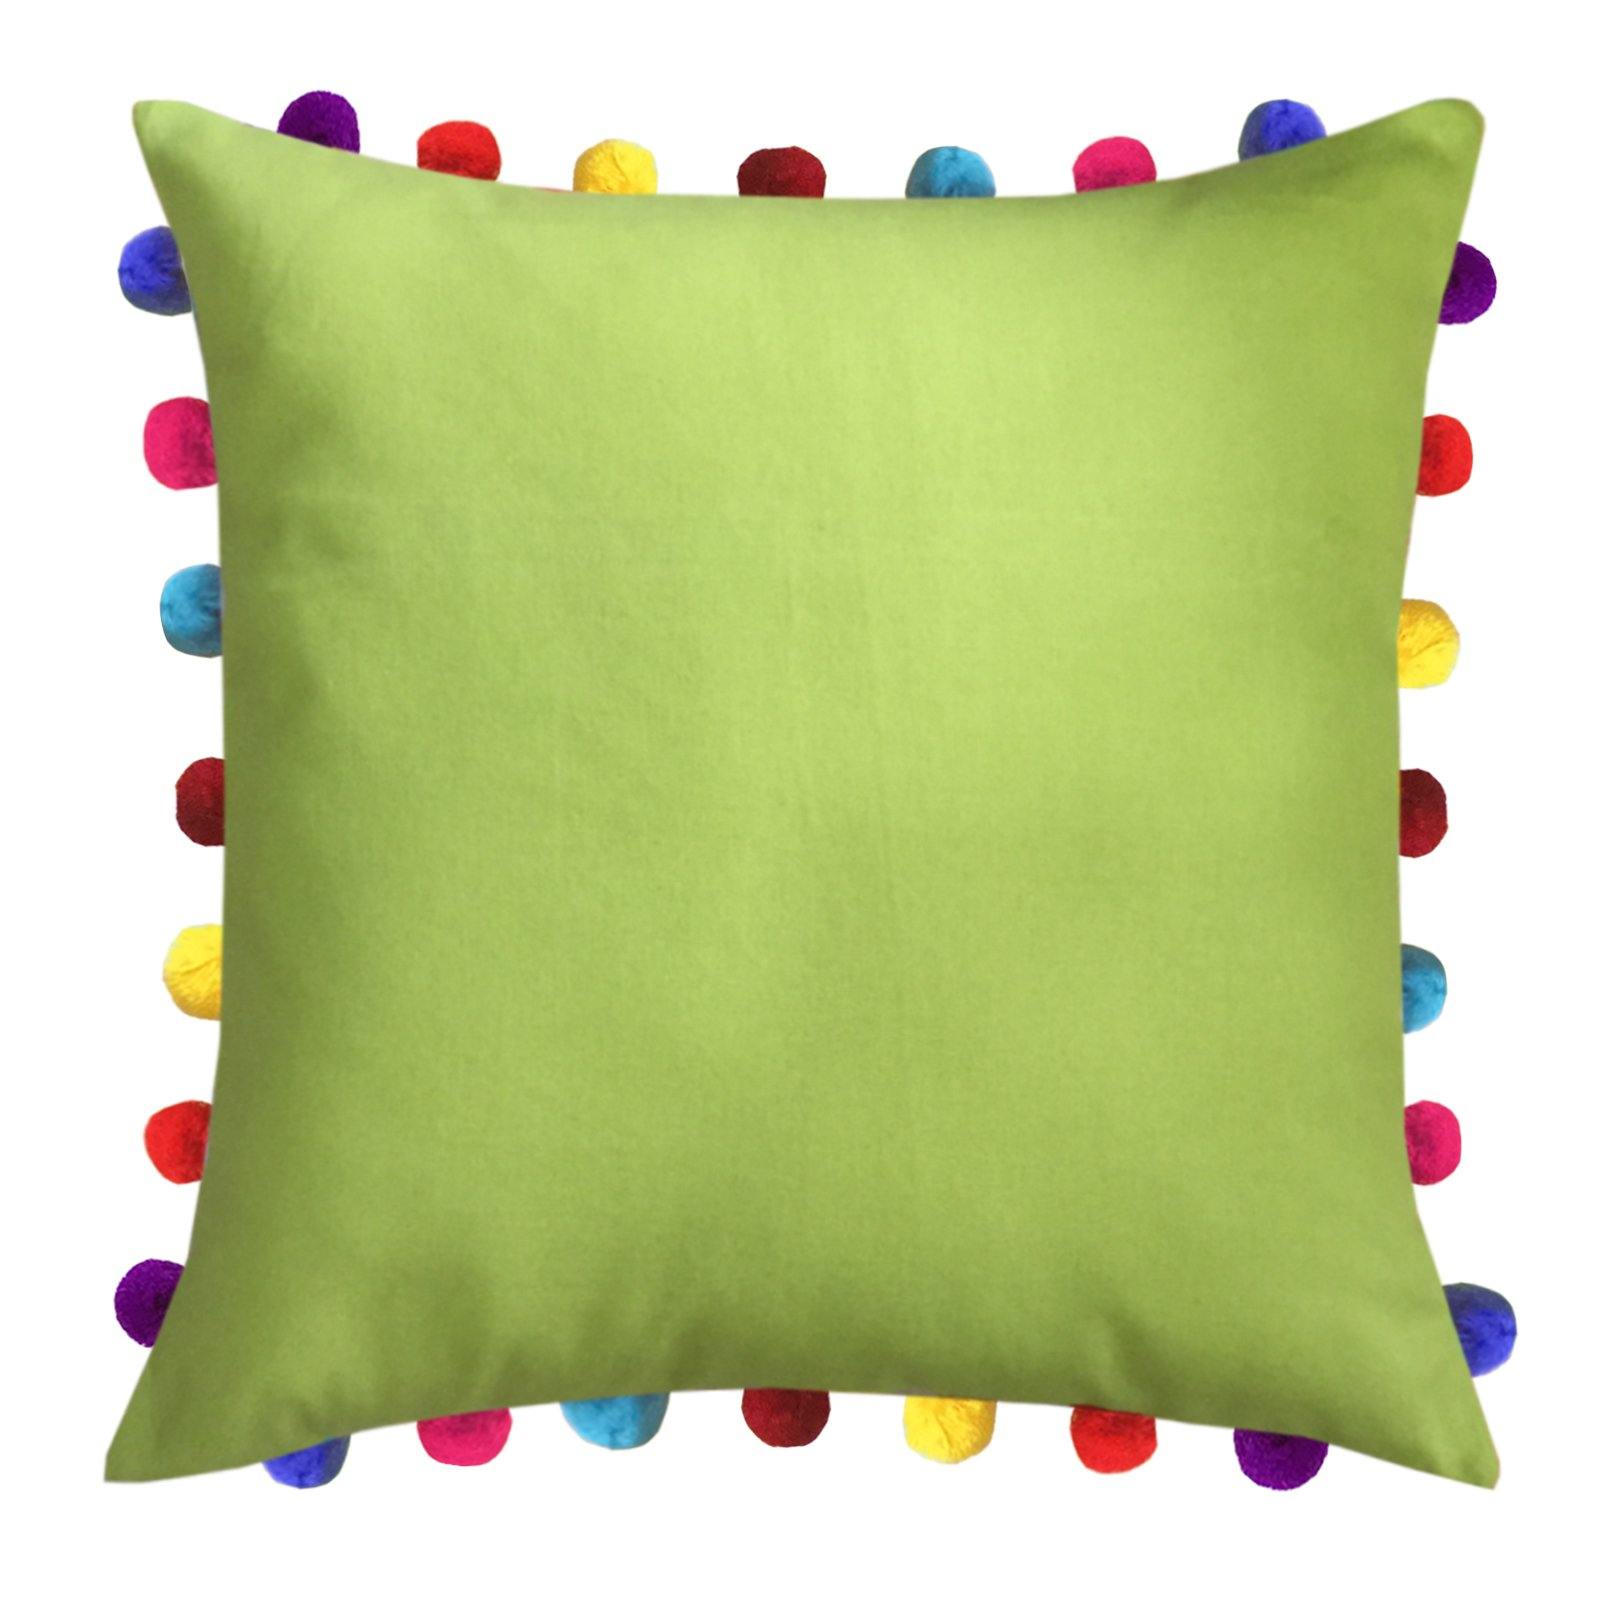 Lushomes Palm Cushion Cover with Colorful Pom Poms (Single pc, 20 x 20”) - Lushomes